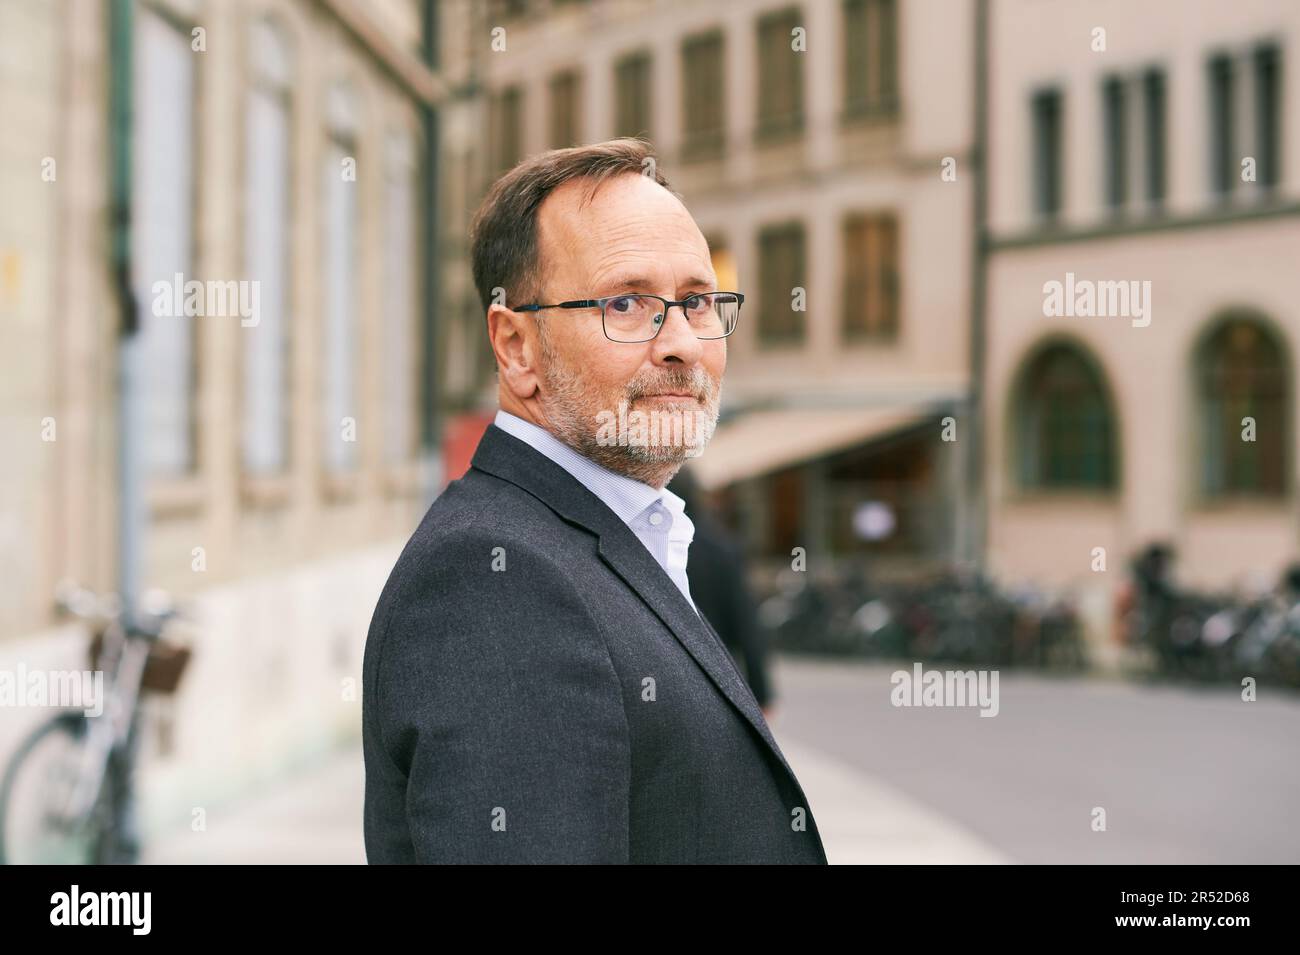 Outdoor portrait of middle age man looking back over the shoulder, wearing glasses and grey suit Stock Photo